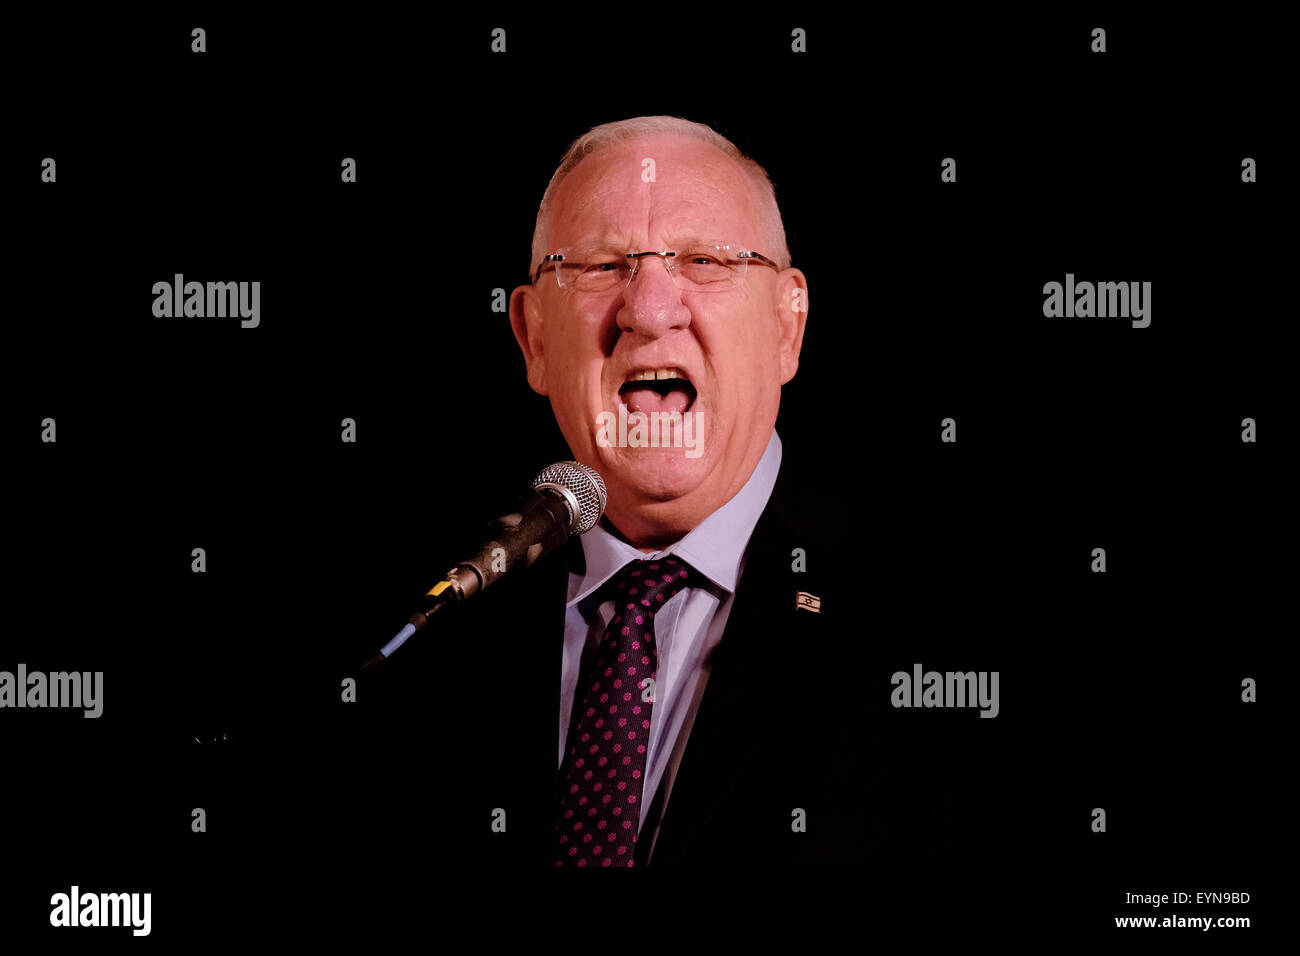 Israeli president Reuven Rivlin speaking at a memorial rally in Zion Square in the center of Jerusalem to protest stabbing attack at Jerusalem's Gay Pride parade by an ultra Orthodox Jewish man 01 August 2015. Rallies took place in major Israeli cities on Saturday night. Stock Photo